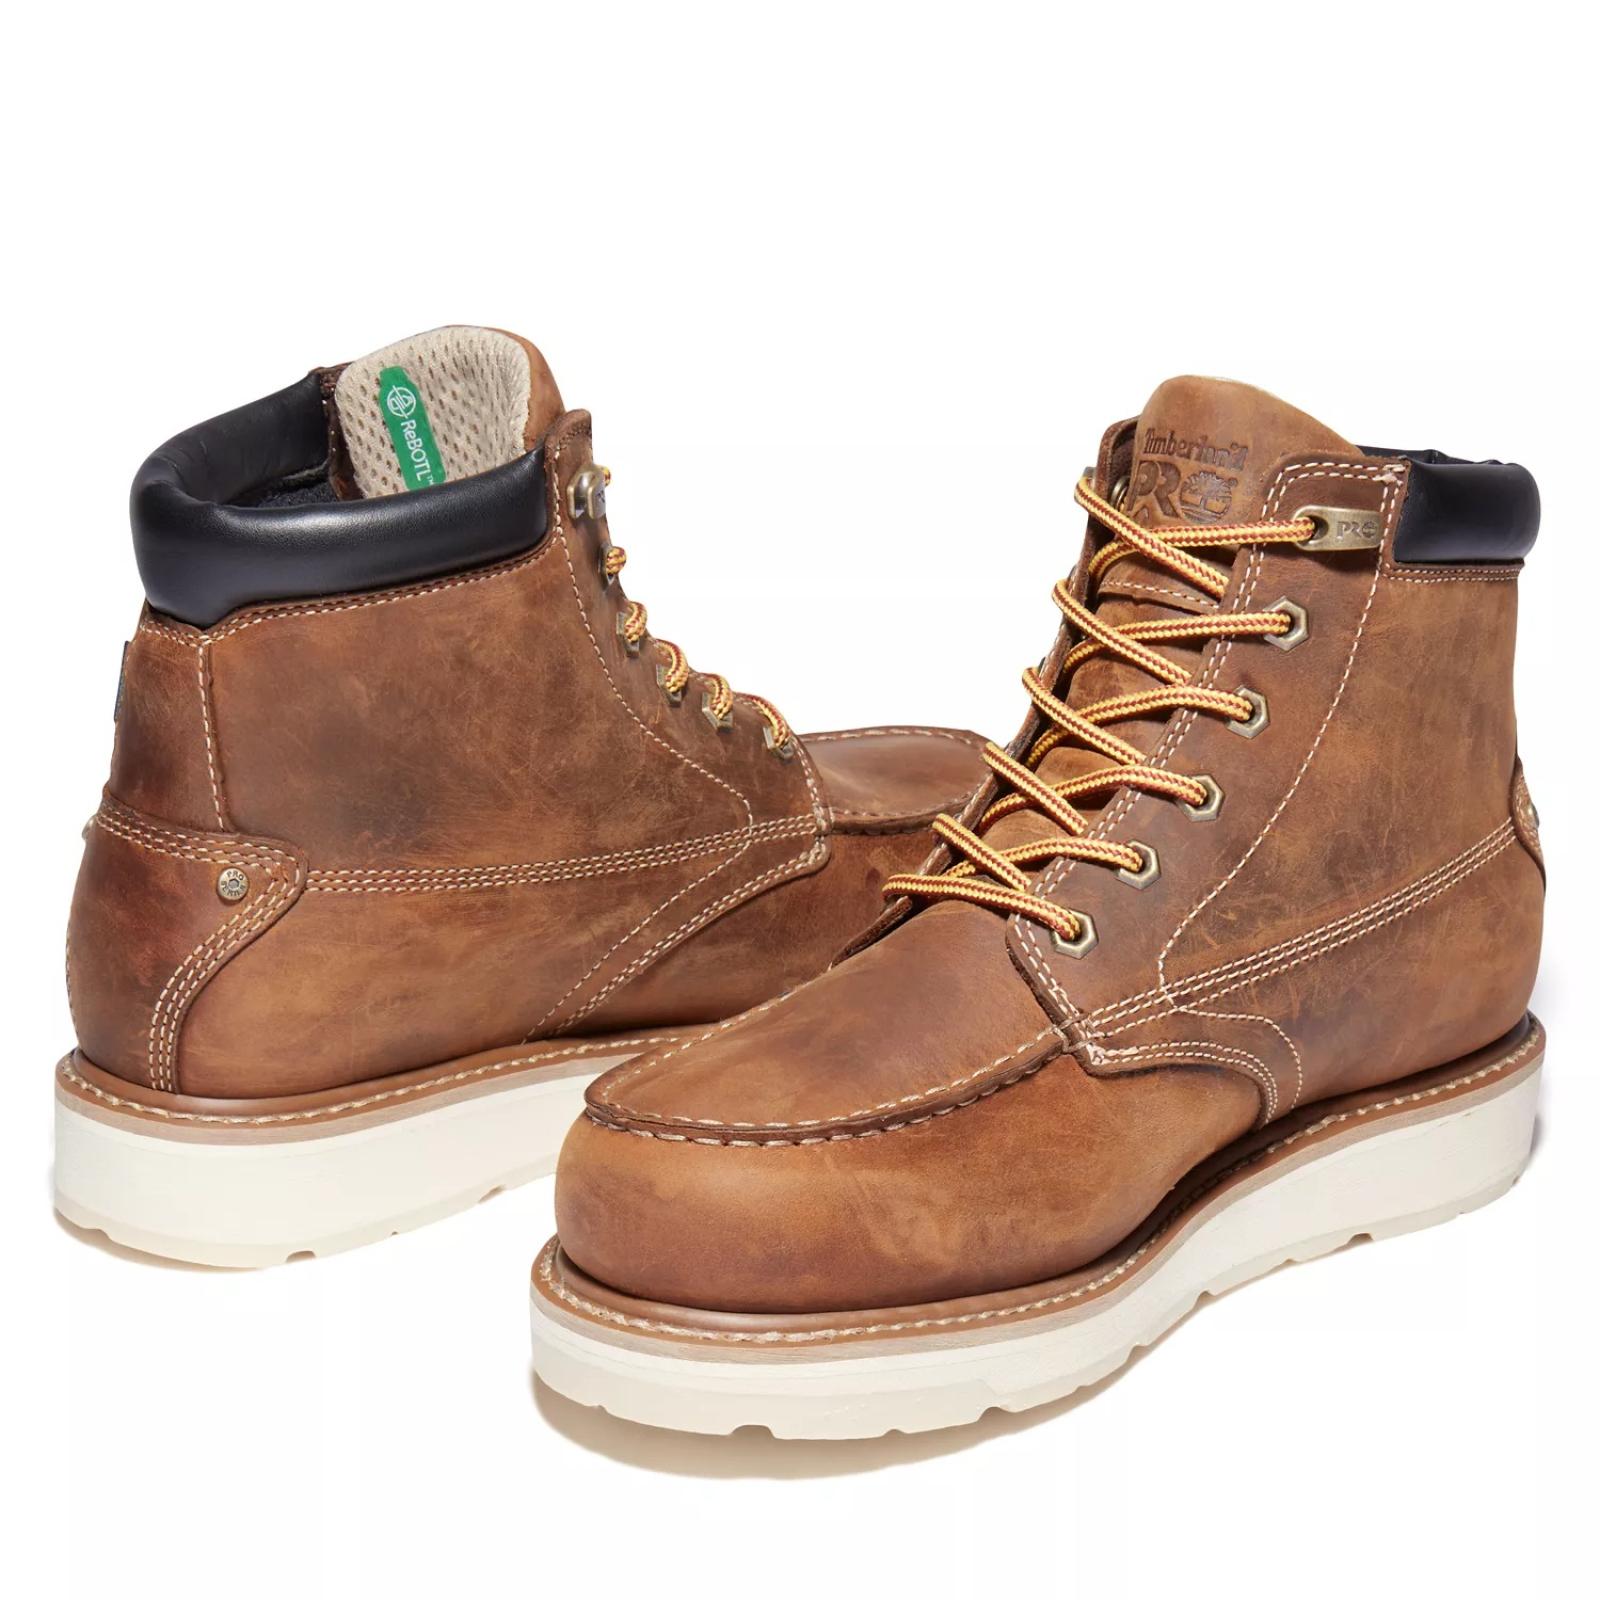 Timberland PRO Men's Gridworks 6" Soft Toe Boots